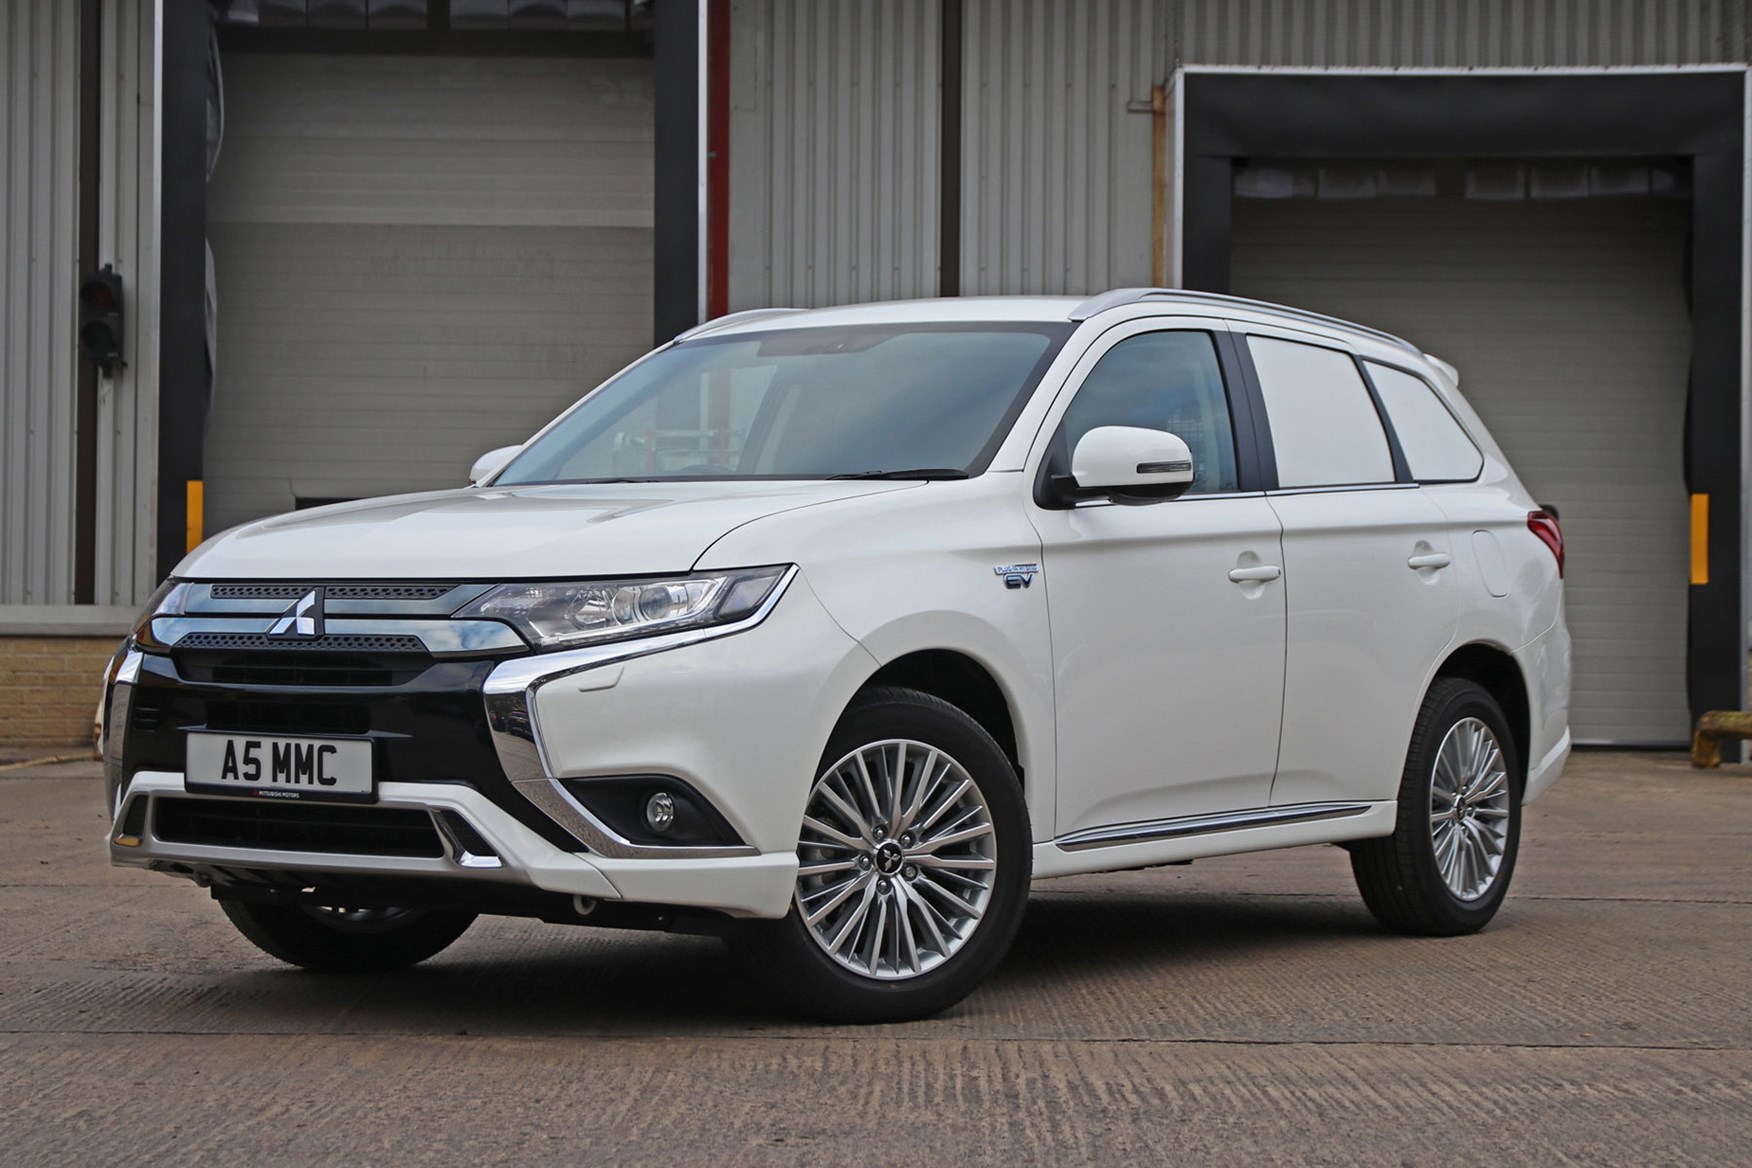 Mitsubishi Outlander Commercial 4x4 van review - 2019 PHEV front view, white